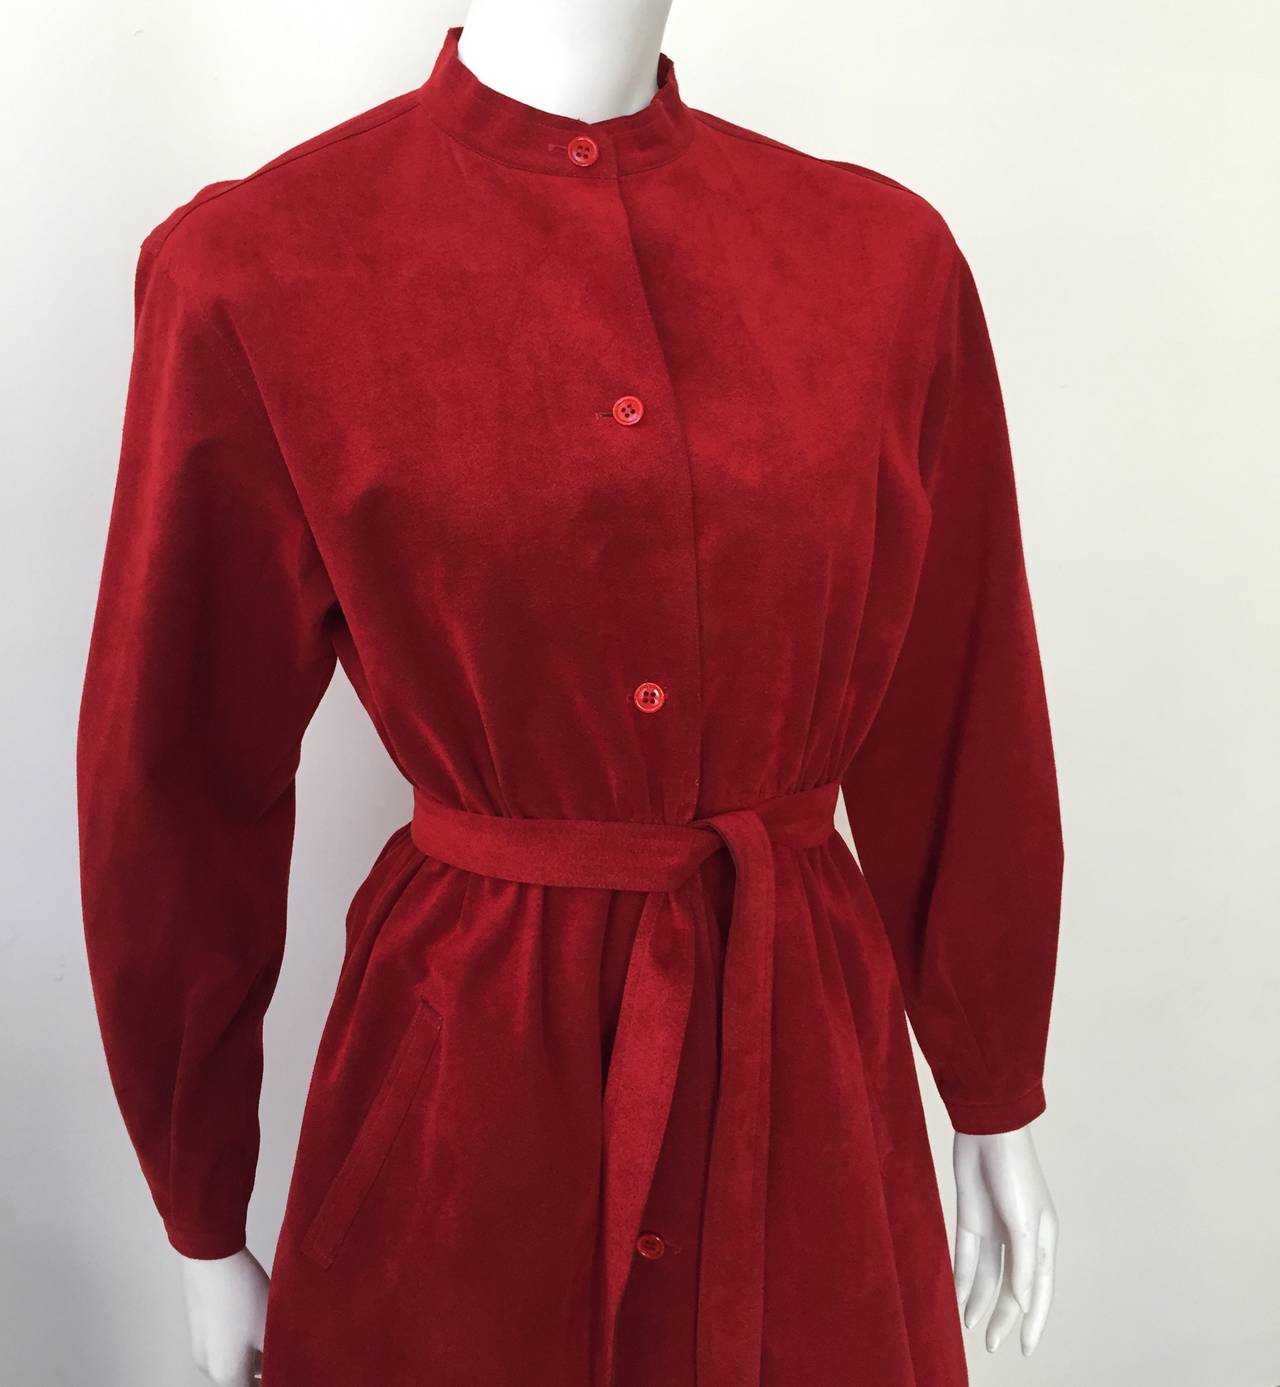 Halston 1970s dark red ultra suede button up dress with pockets and belt. Elastic waistband that easily fits a woman size 4-6 but please see measurements I will provide you so you make sure this dress fits you to perfection. 
Wear as a dress or coat